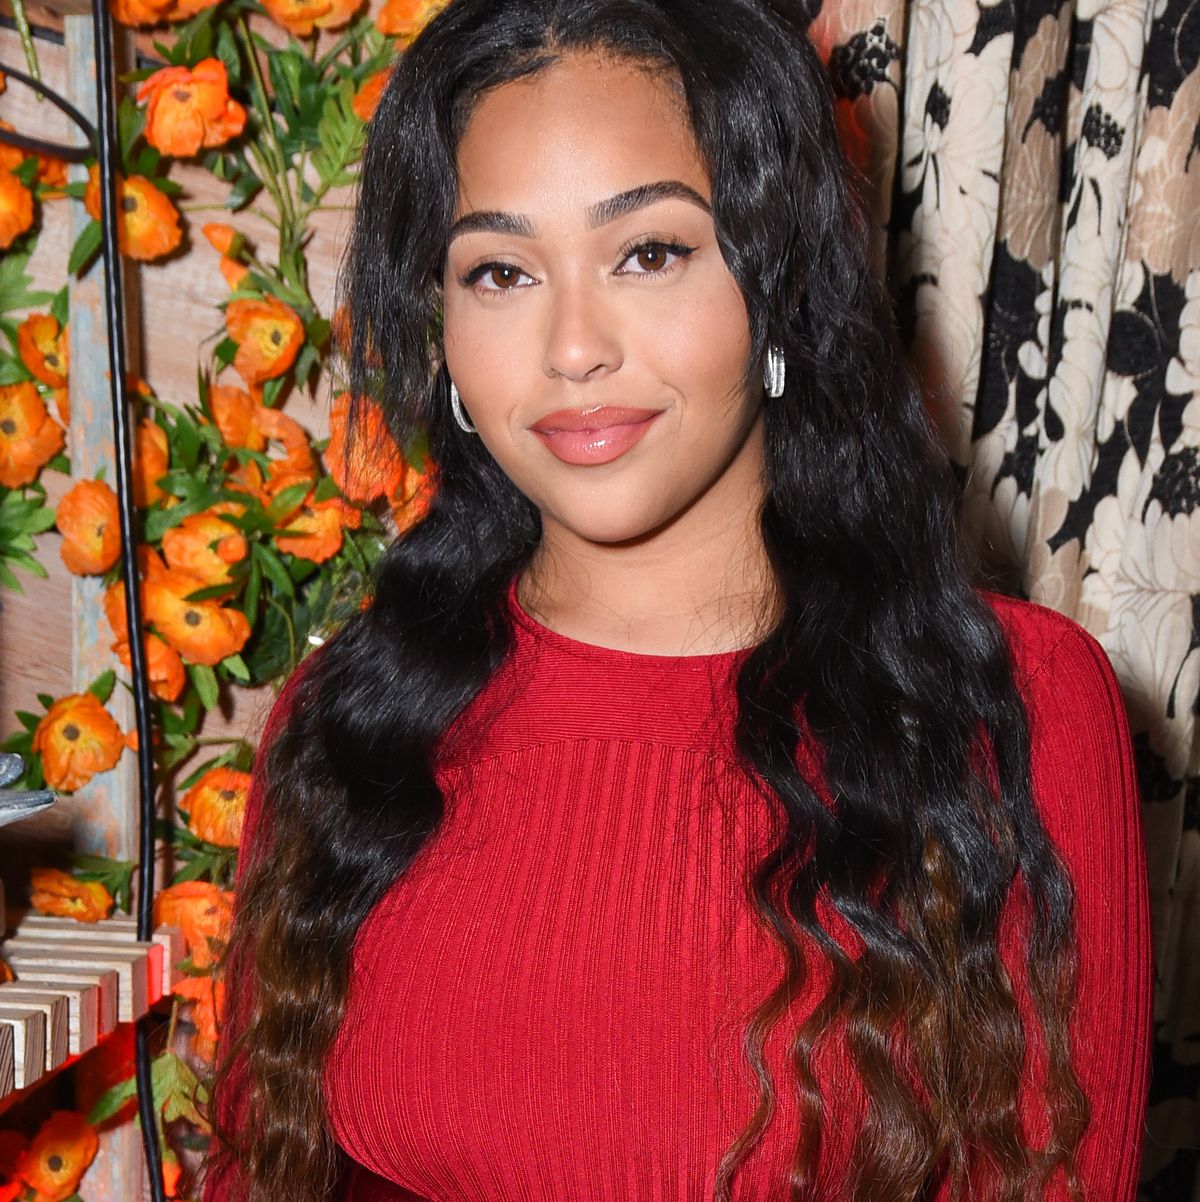 Bellami Hair Apologizes To Jordyn Woods After Offensive Instagram